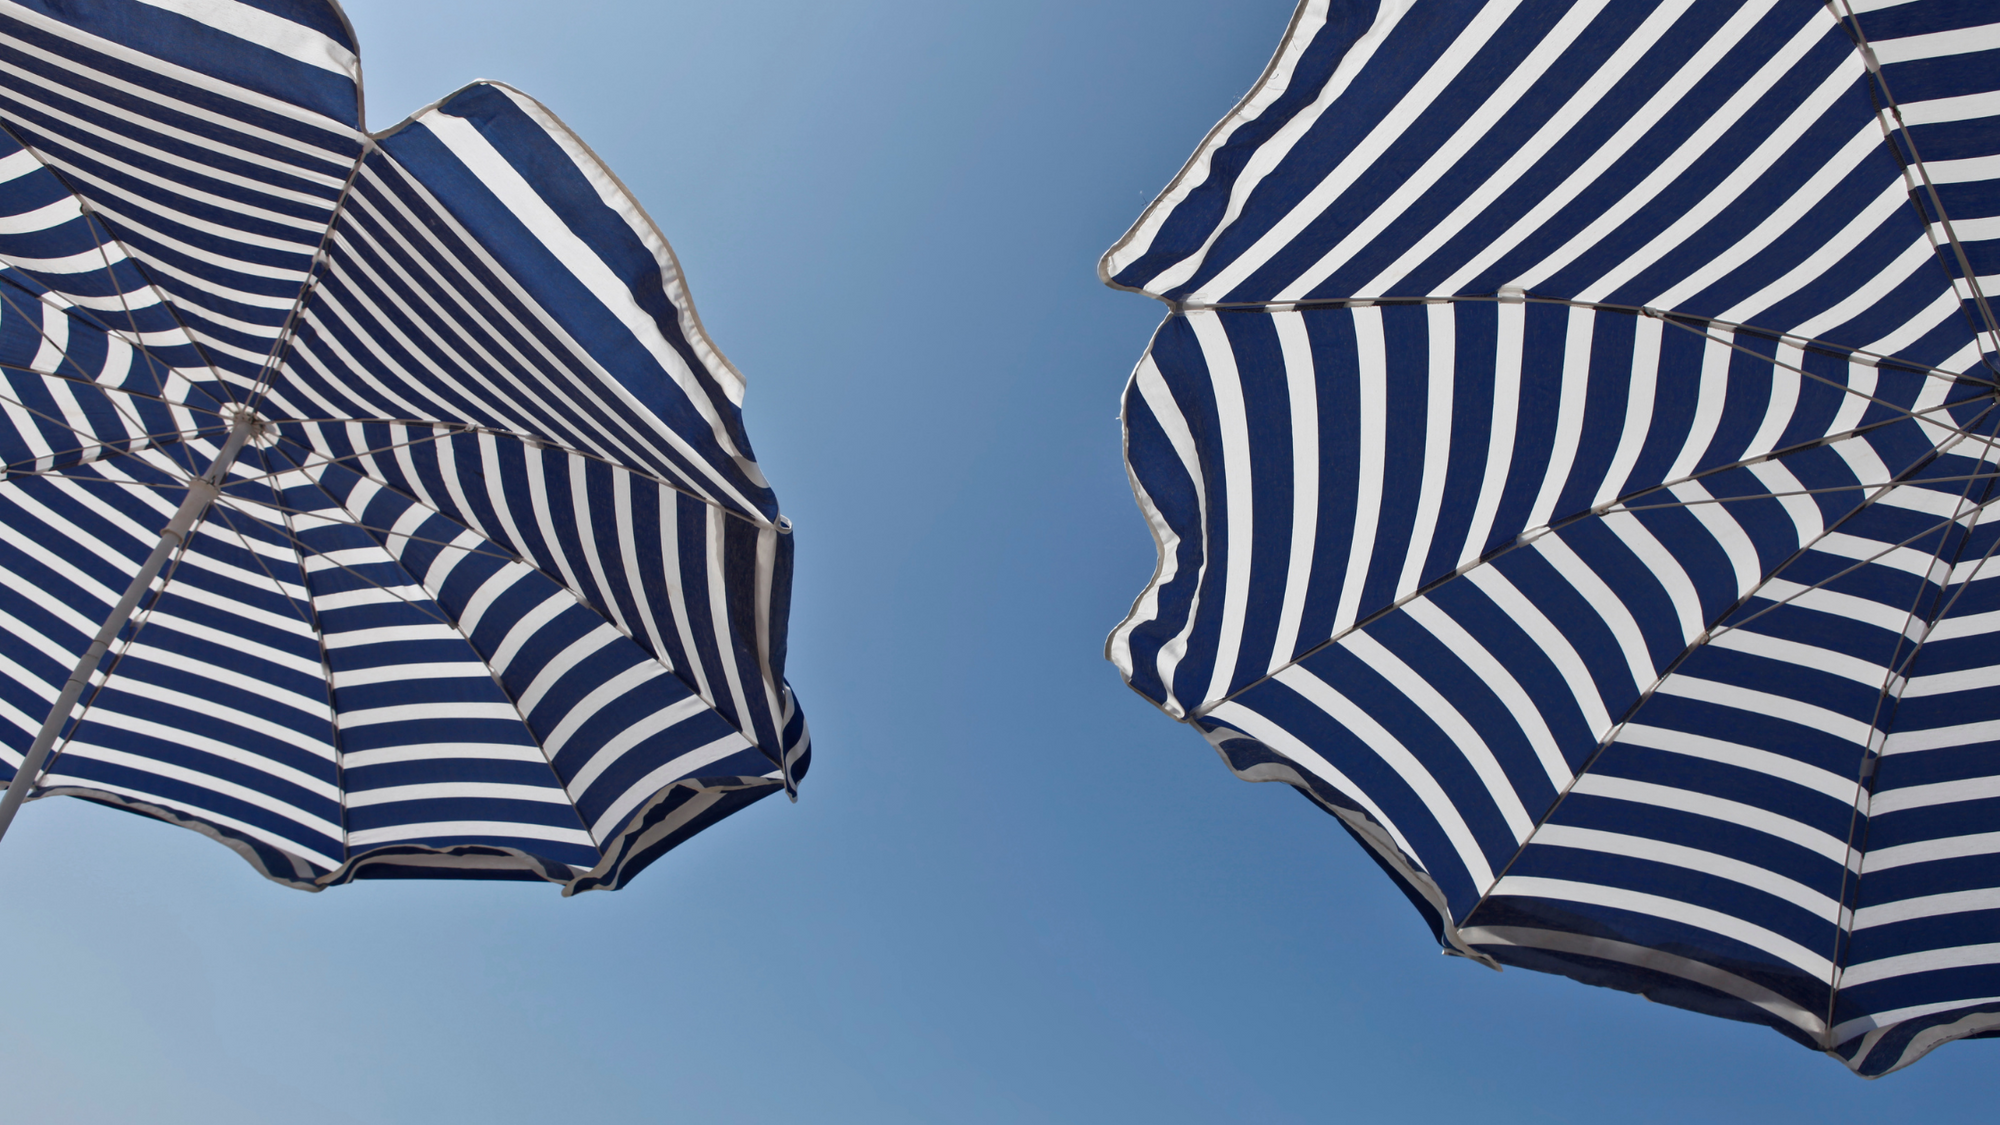 6 myths about skin cancer and sun protection